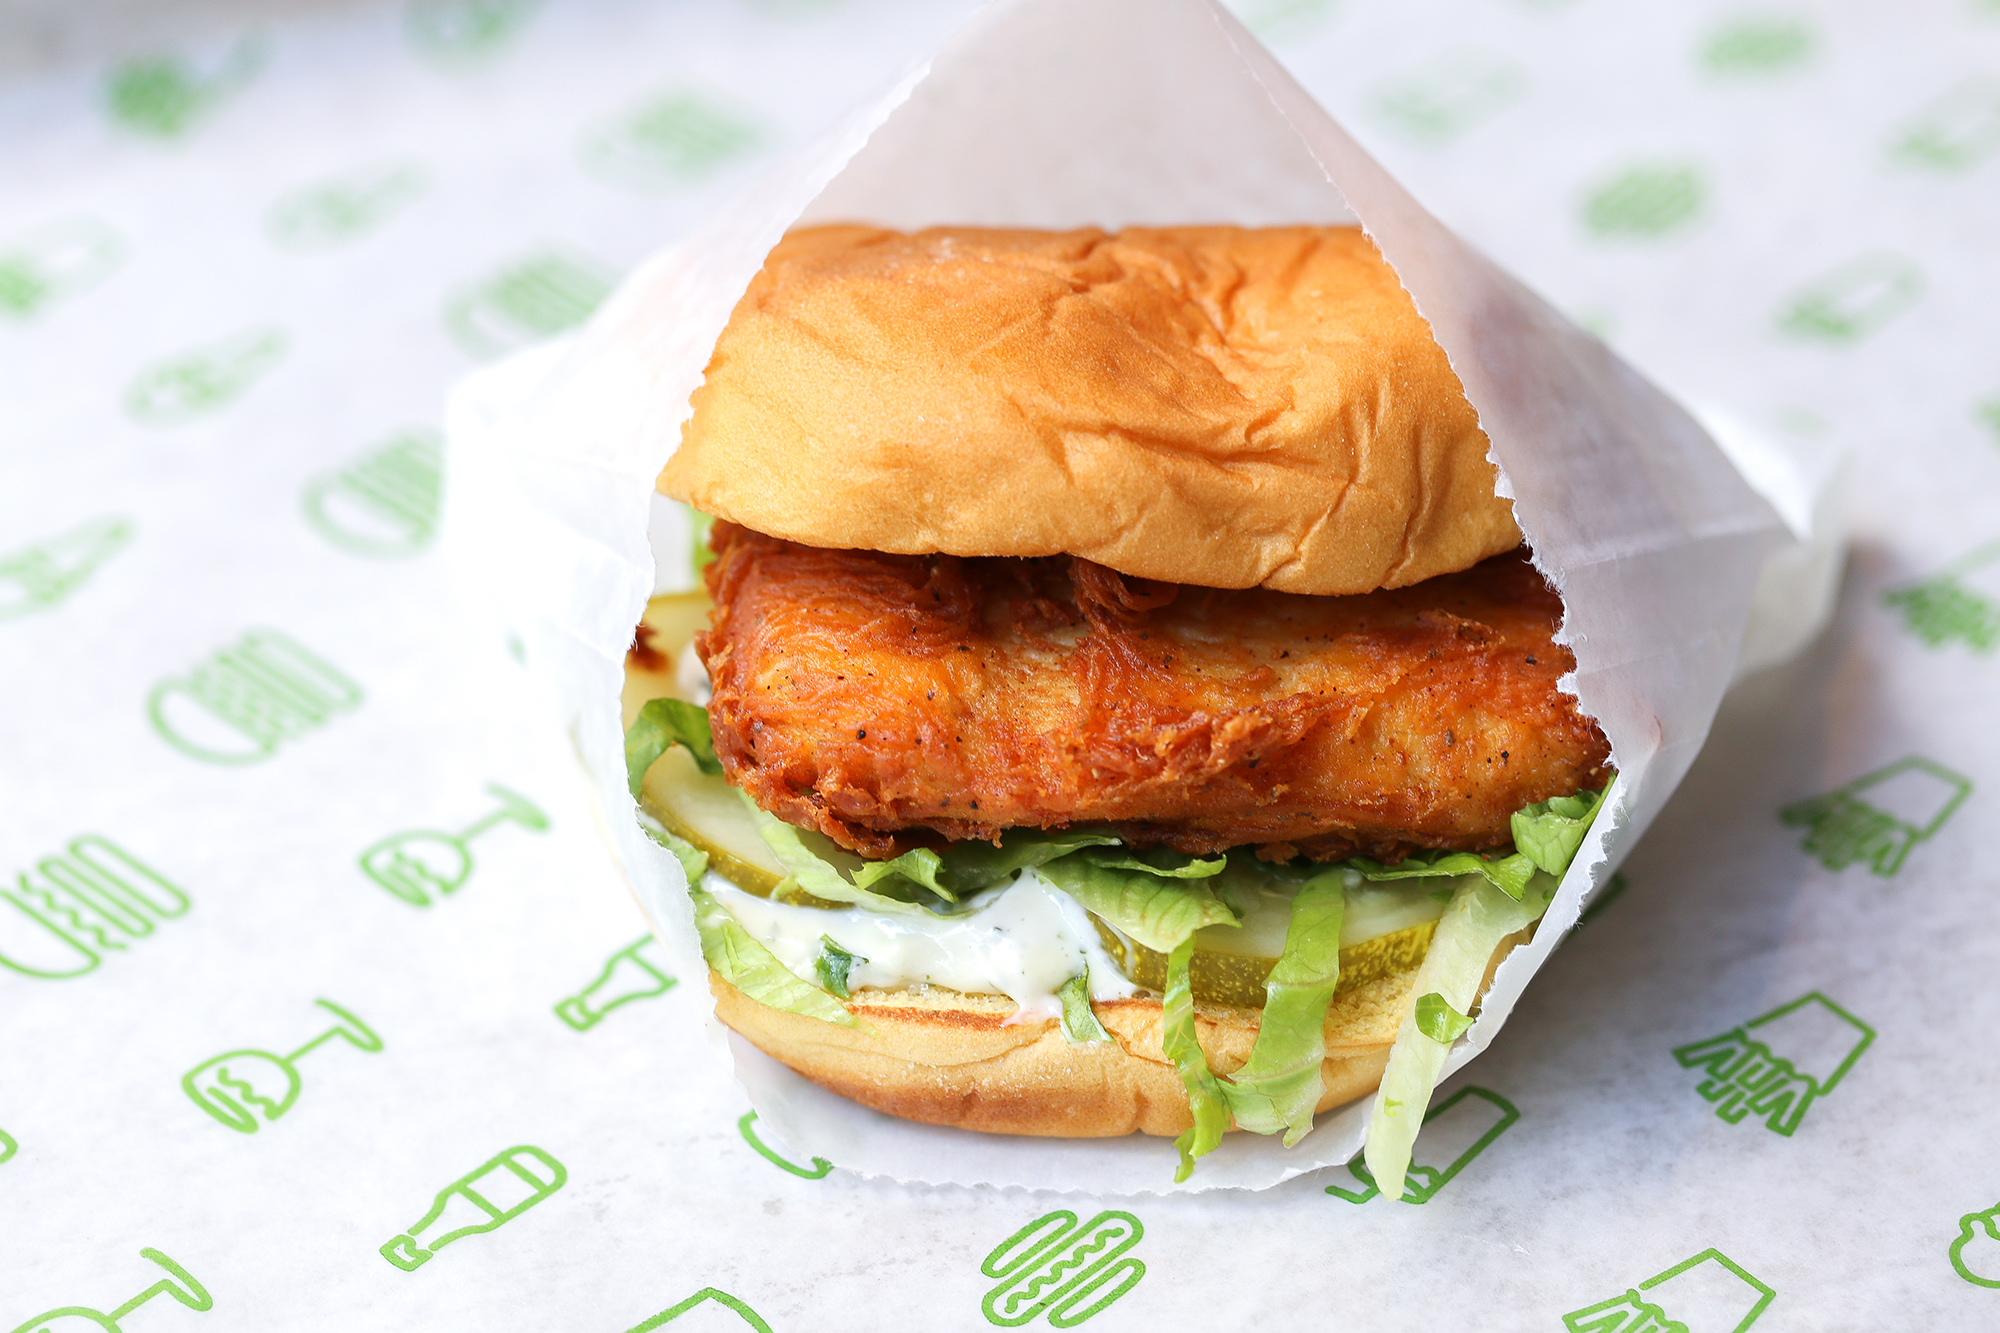 Chick’n Shack: crispy chicken breast with lettuce, pickles, and buttermilk herb mayo.